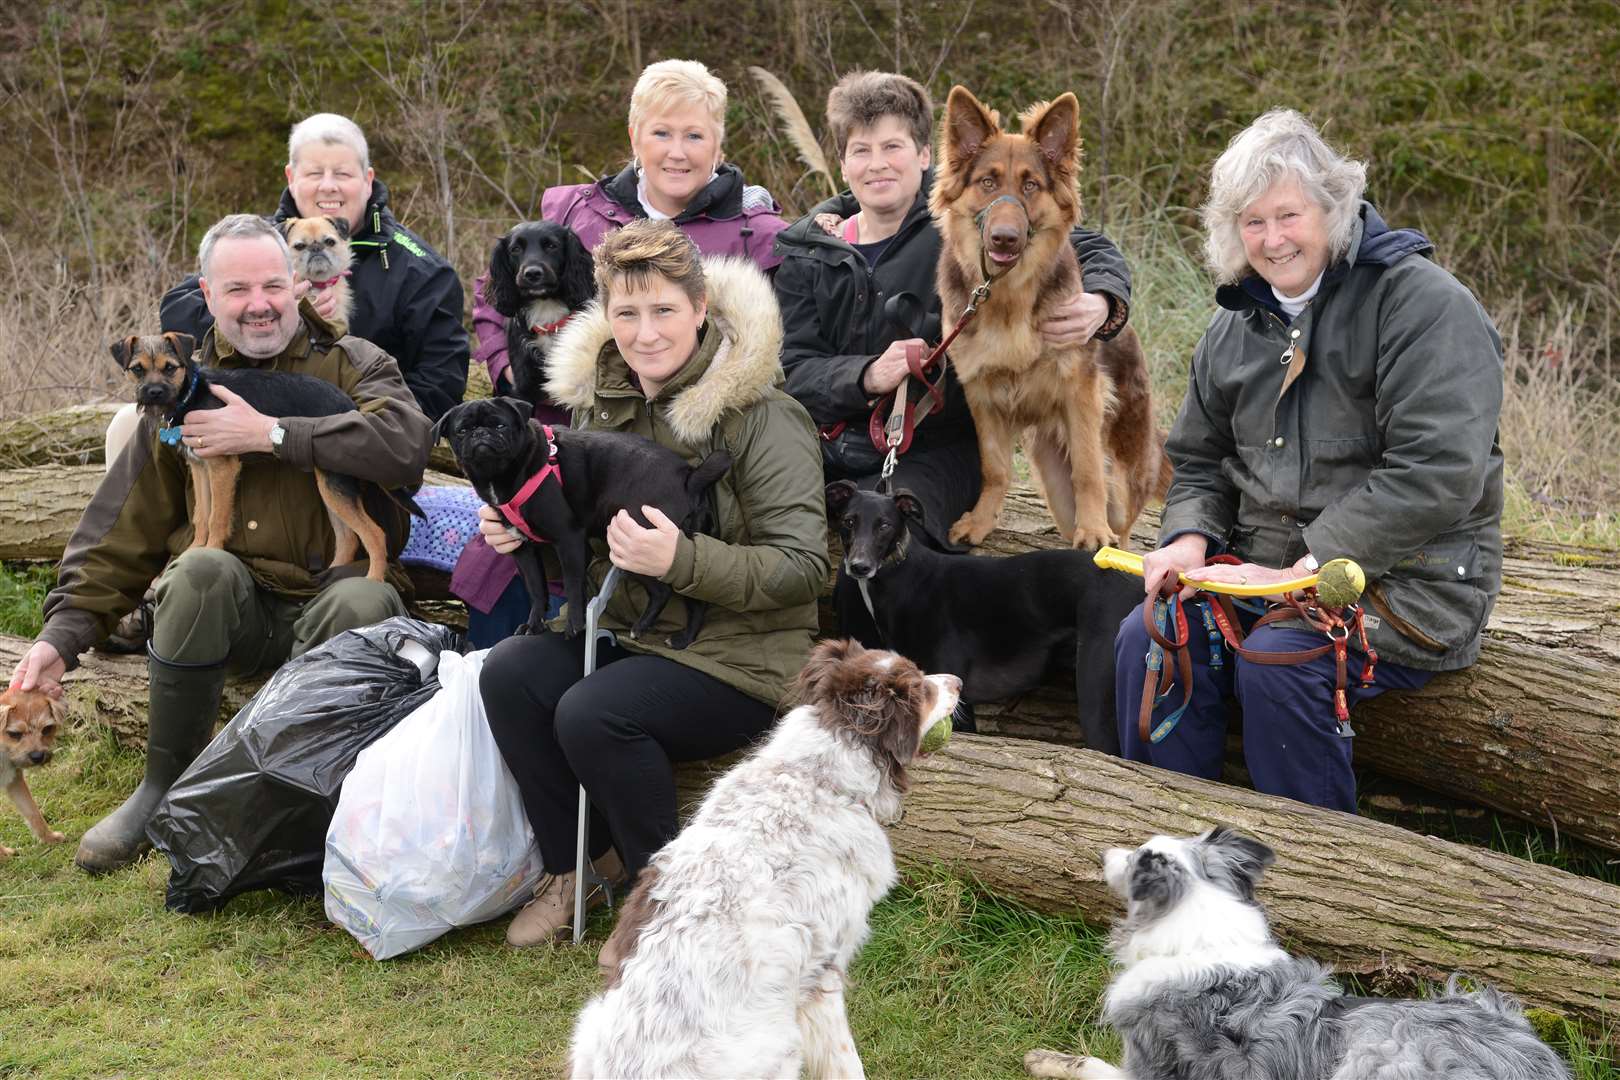 The 'Little Burton Litter Pickers' and their dogs